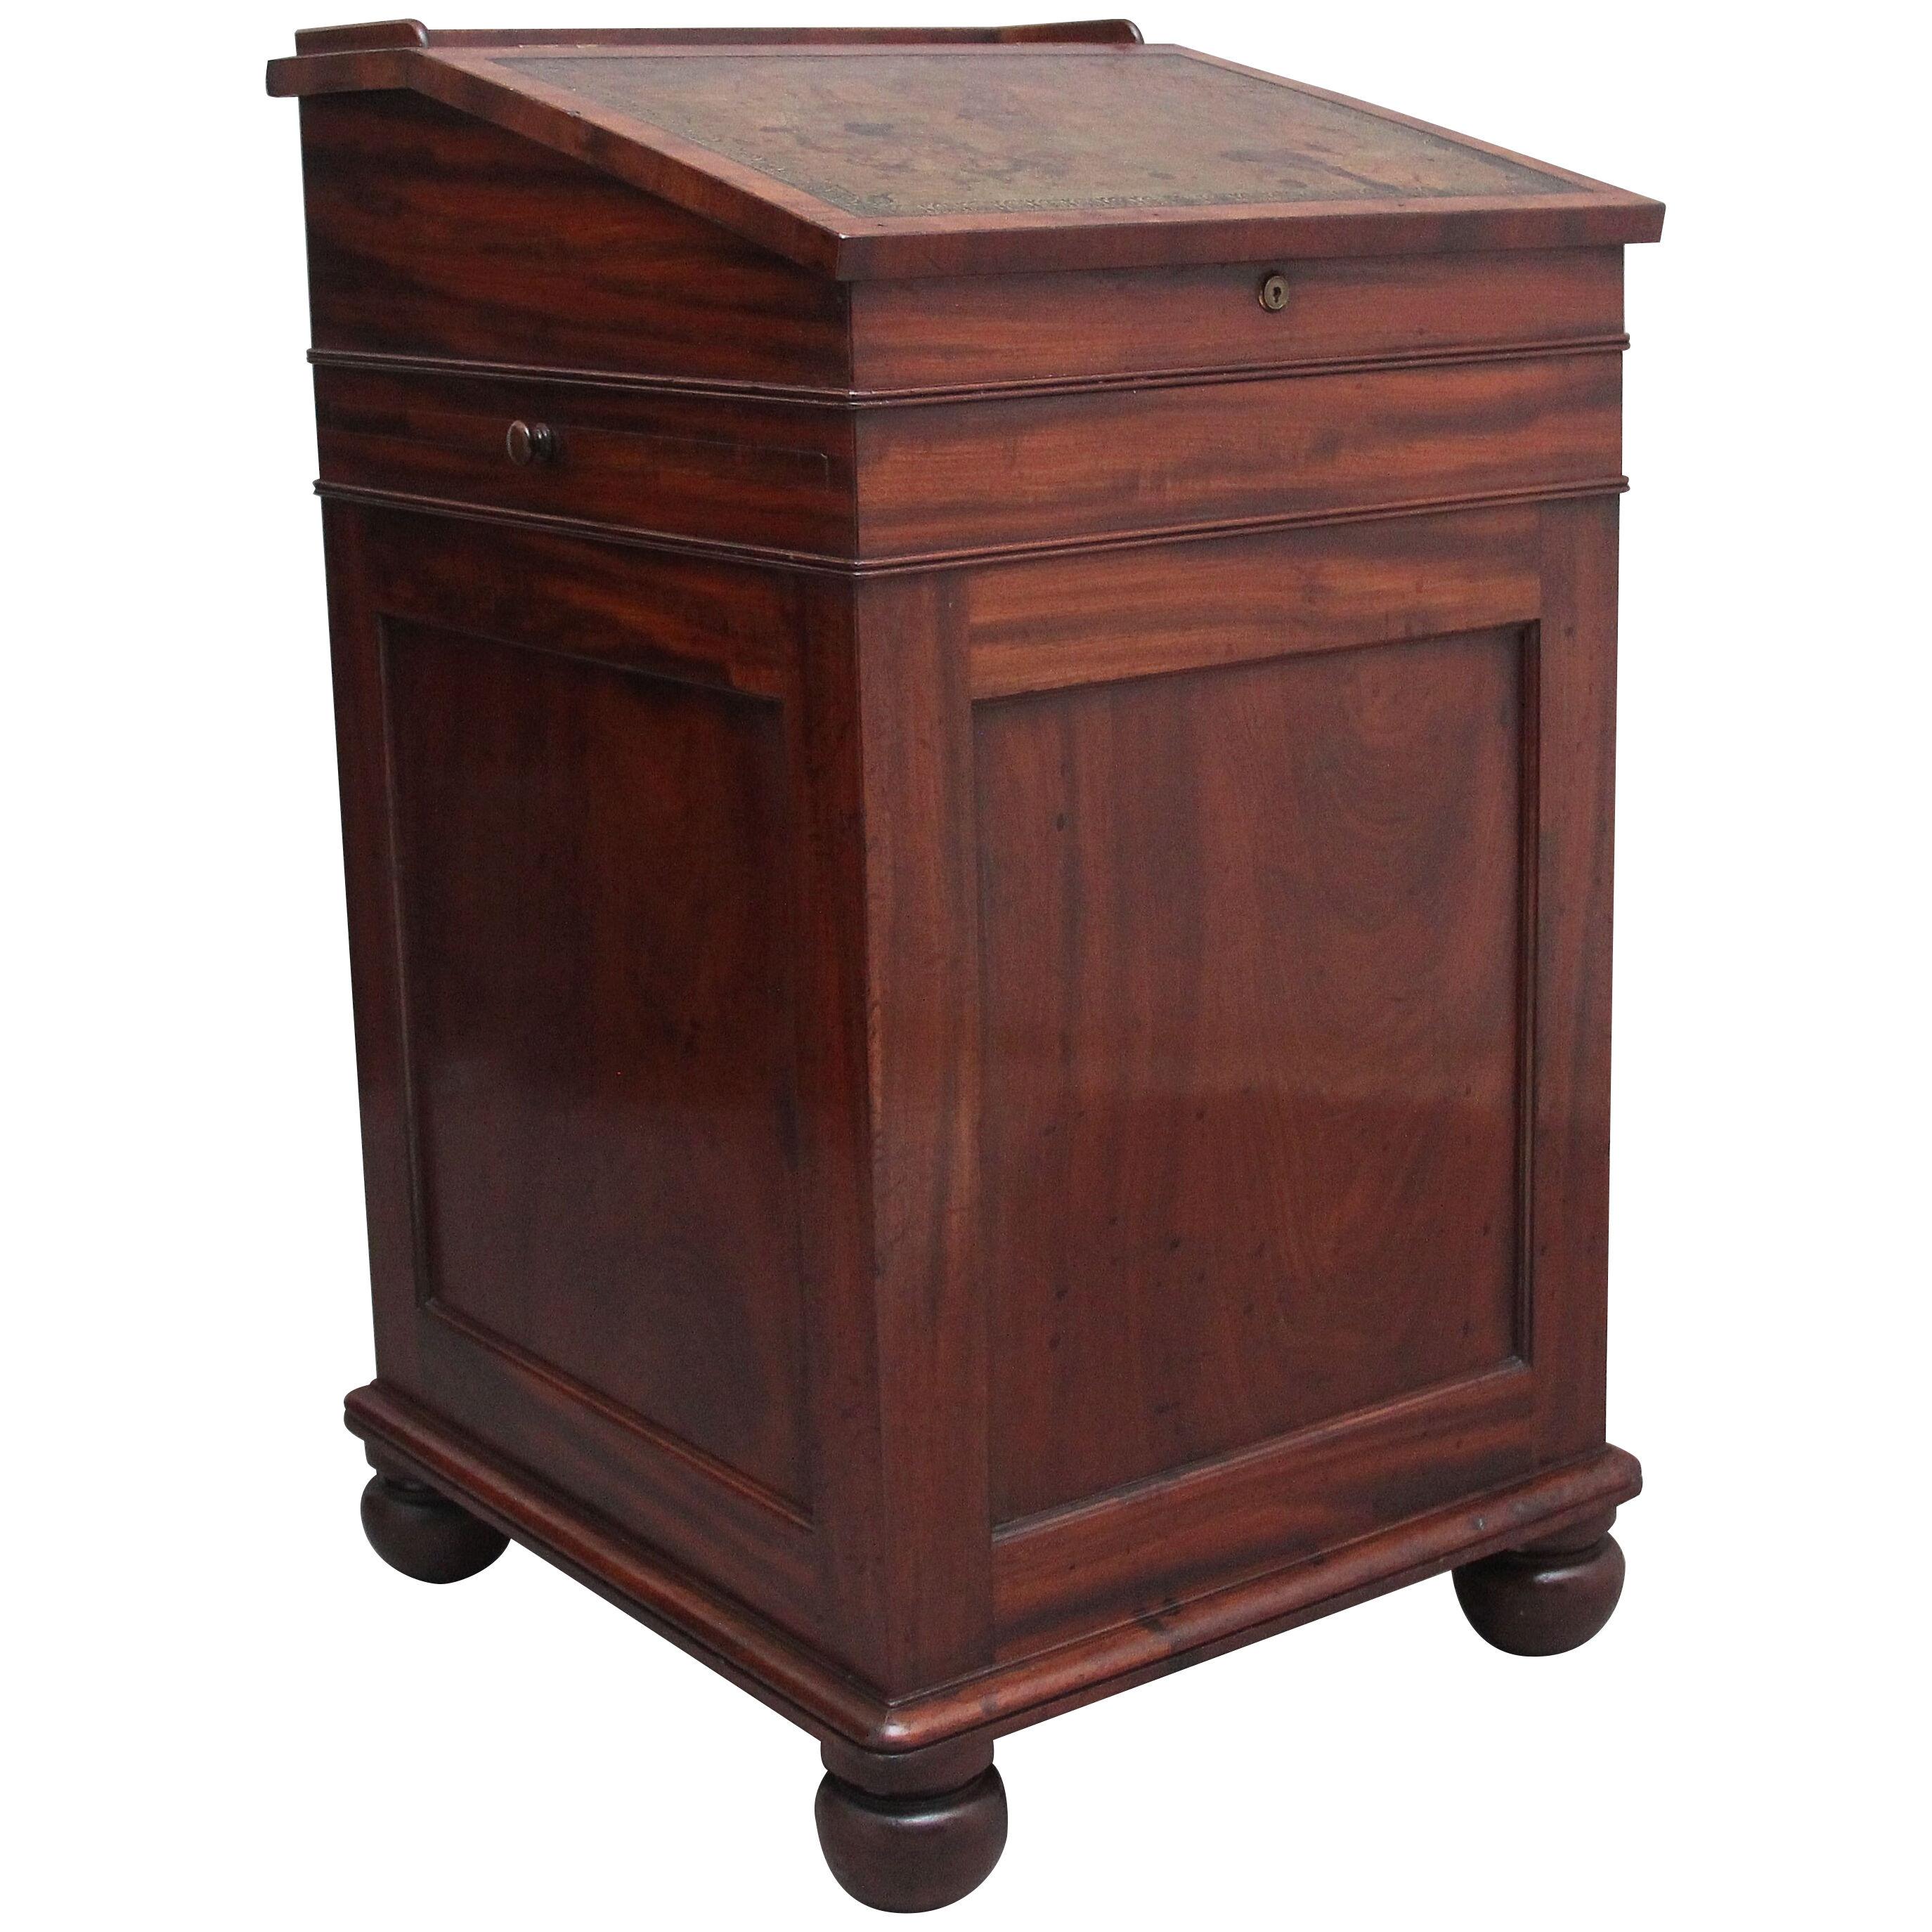 Early 19th Century mahogany davenport by Gillows of Lancaster